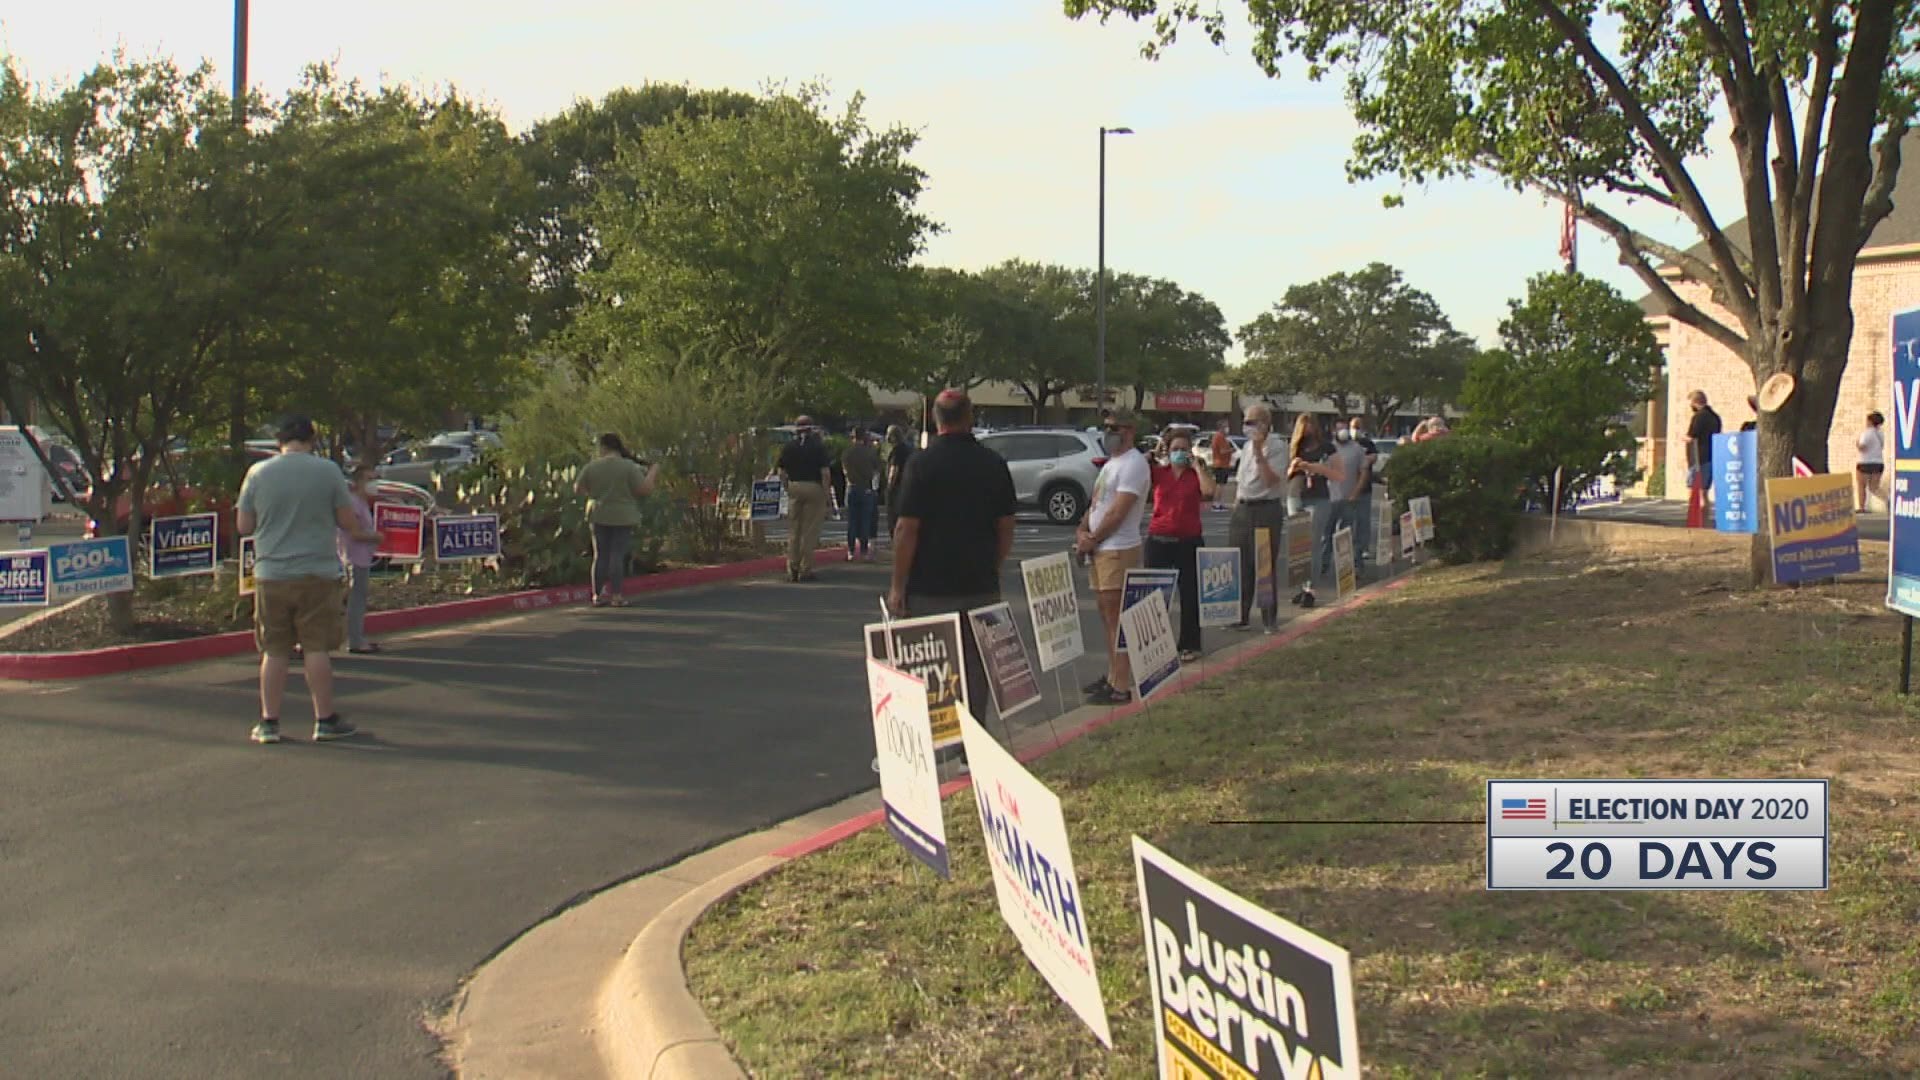 Travis County's clerk told KVUE there were really long lines at some polling places and that the turnout was much bigger than her office had expected.